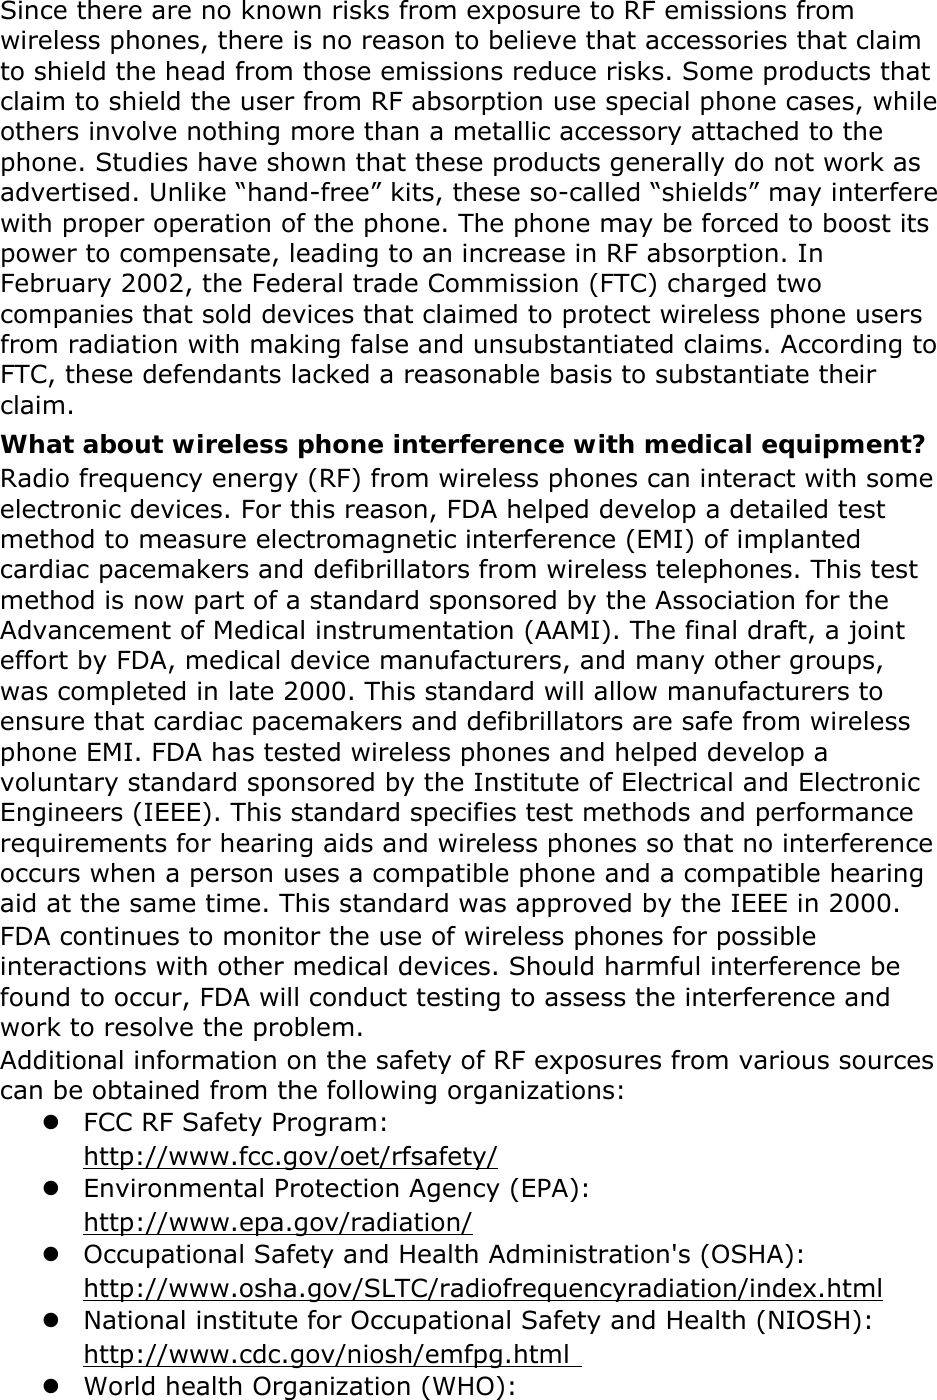 Since there are no known risks from exposure to RF emissions from wireless phones, there is no reason to believe that accessories that claim to shield the head from those emissions reduce risks. Some products that claim to shield the user from RF absorption use special phone cases, while others involve nothing more than a metallic accessory attached to the phone. Studies have shown that these products generally do not work as advertised. Unlike “hand-free” kits, these so-called “shields” may interfere with proper operation of the phone. The phone may be forced to boost its power to compensate, leading to an increase in RF absorption. In February 2002, the Federal trade Commission (FTC) charged two companies that sold devices that claimed to protect wireless phone users from radiation with making false and unsubstantiated claims. According to FTC, these defendants lacked a reasonable basis to substantiate their claim. What about wireless phone interference with medical equipment? Radio frequency energy (RF) from wireless phones can interact with some electronic devices. For this reason, FDA helped develop a detailed test method to measure electromagnetic interference (EMI) of implanted cardiac pacemakers and defibrillators from wireless telephones. This test method is now part of a standard sponsored by the Association for the Advancement of Medical instrumentation (AAMI). The final draft, a joint effort by FDA, medical device manufacturers, and many other groups, was completed in late 2000. This standard will allow manufacturers to ensure that cardiac pacemakers and defibrillators are safe from wireless phone EMI. FDA has tested wireless phones and helped develop a voluntary standard sponsored by the Institute of Electrical and Electronic Engineers (IEEE). This standard specifies test methods and performance requirements for hearing aids and wireless phones so that no interference occurs when a person uses a compatible phone and a compatible hearing aid at the same time. This standard was approved by the IEEE in 2000. FDA continues to monitor the use of wireless phones for possible interactions with other medical devices. Should harmful interference be found to occur, FDA will conduct testing to assess the interference and work to resolve the problem. Additional information on the safety of RF exposures from various sources can be obtained from the following organizations:  FCC RF Safety Program:  http://www.fcc.gov/oet/rfsafety/  Environmental Protection Agency (EPA):  http://www.epa.gov/radiation/  Occupational Safety and Health Administration&apos;s (OSHA):         http://www.osha.gov/SLTC/radiofrequencyradiation/index.html  National institute for Occupational Safety and Health (NIOSH):  http://www.cdc.gov/niosh/emfpg.html    World health Organization (WHO): 